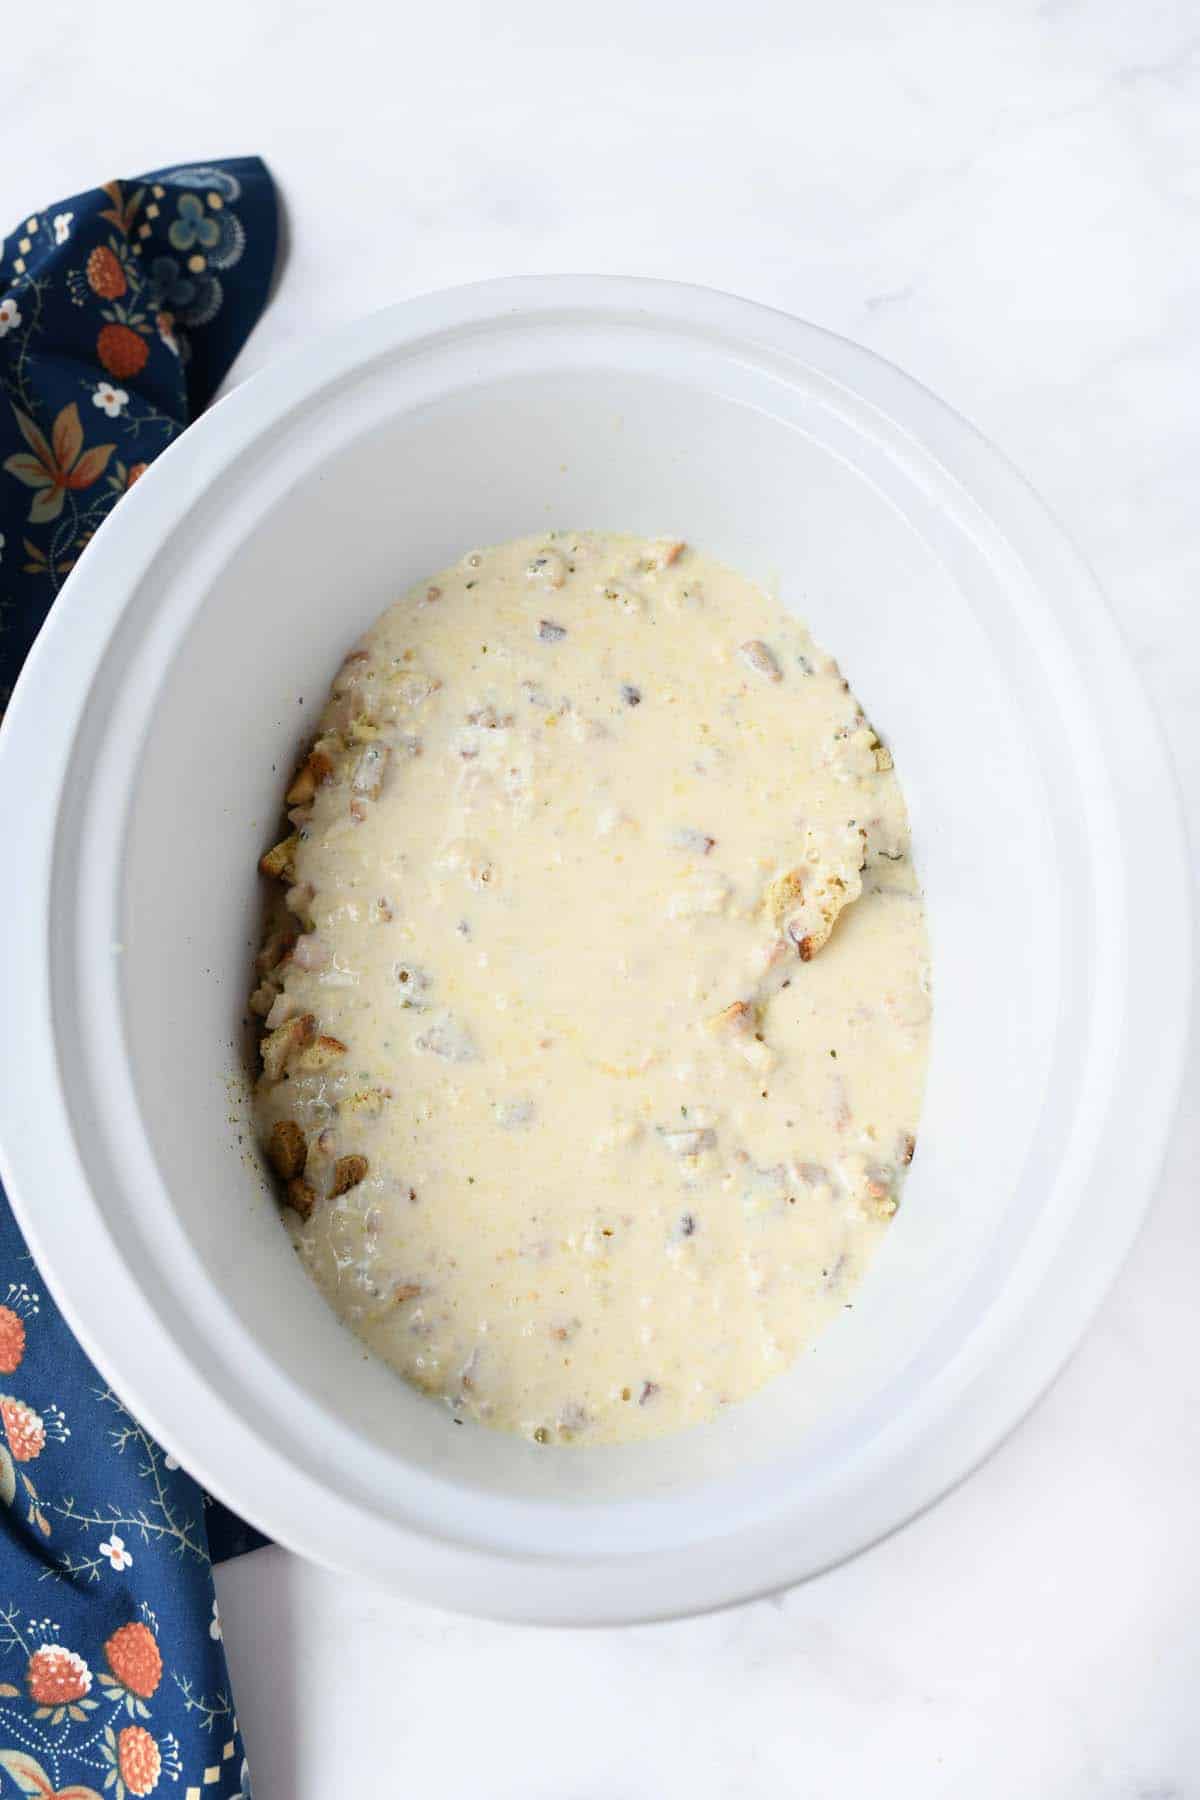 Creamy sauce in a slow cooker.